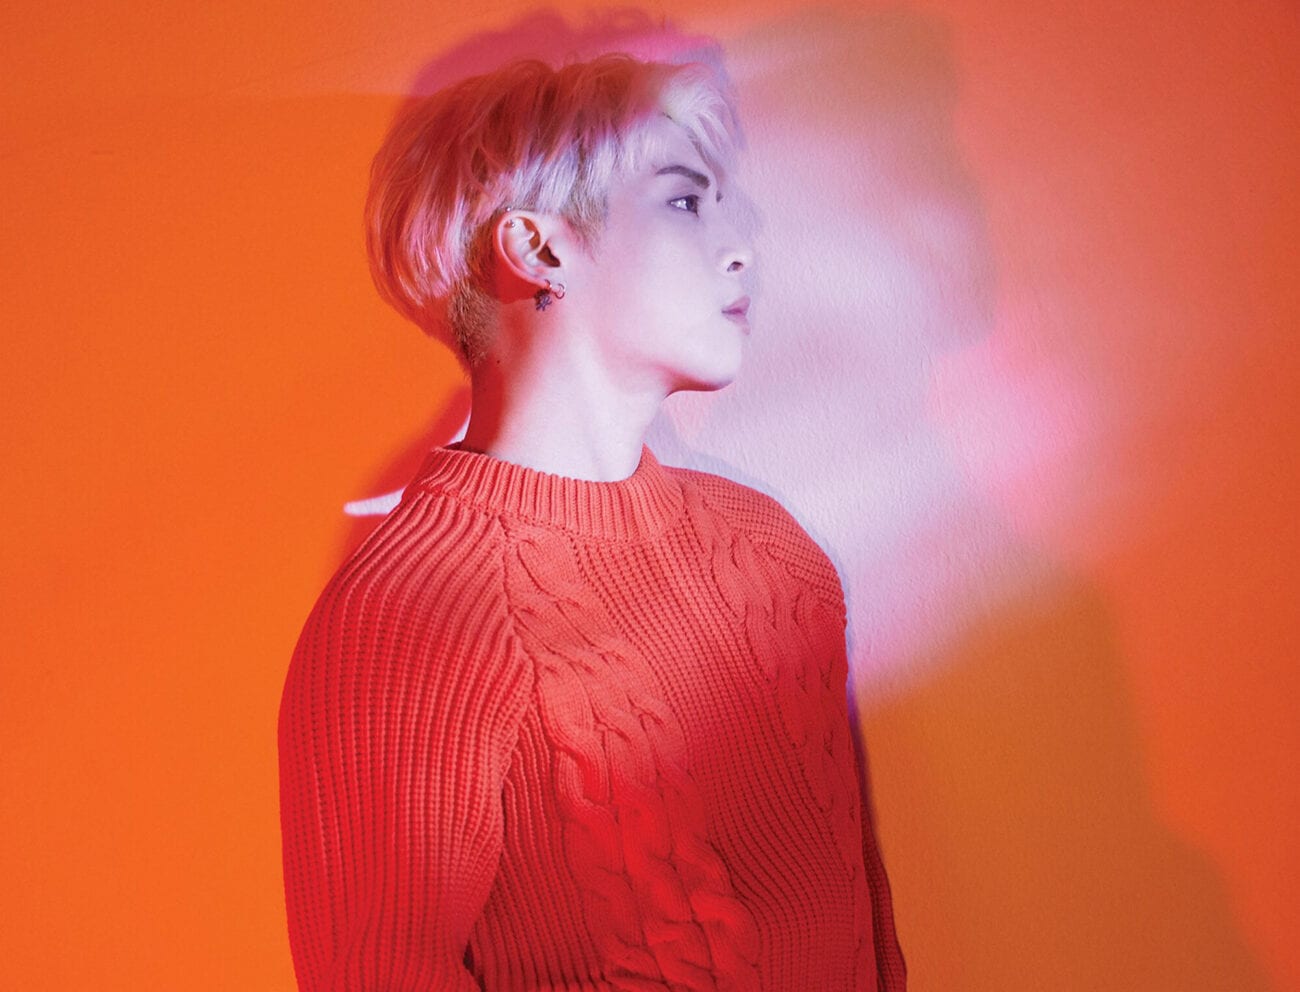 Back in 2017, the lead vocalist of the “Princes of K-pop” band SHINee, Jonghyun, died by suicide. Learn more about the musician here.